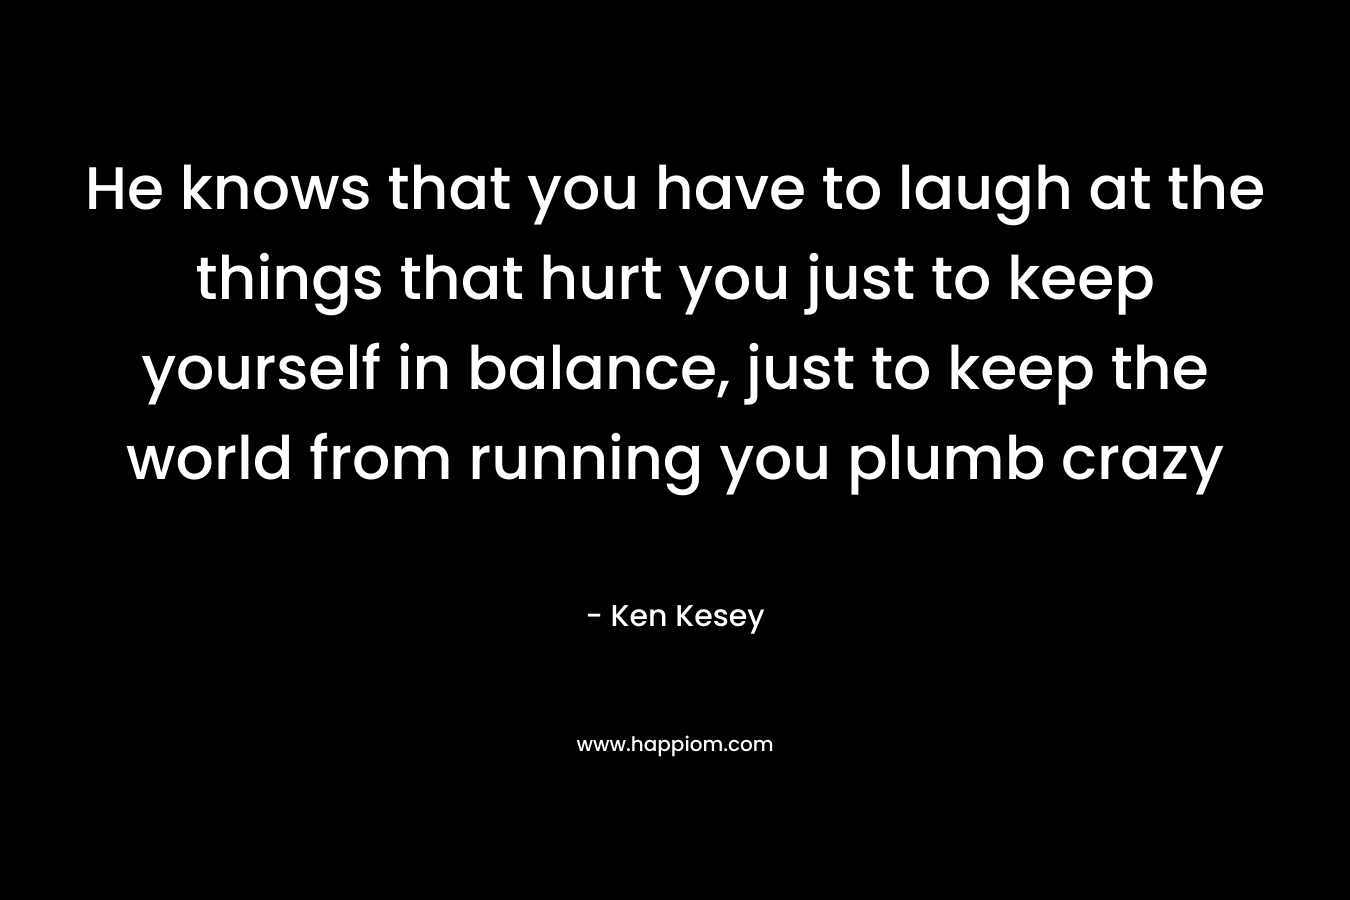 He knows that you have to laugh at the things that hurt you just to keep yourself in balance, just to keep the world from running you plumb crazy